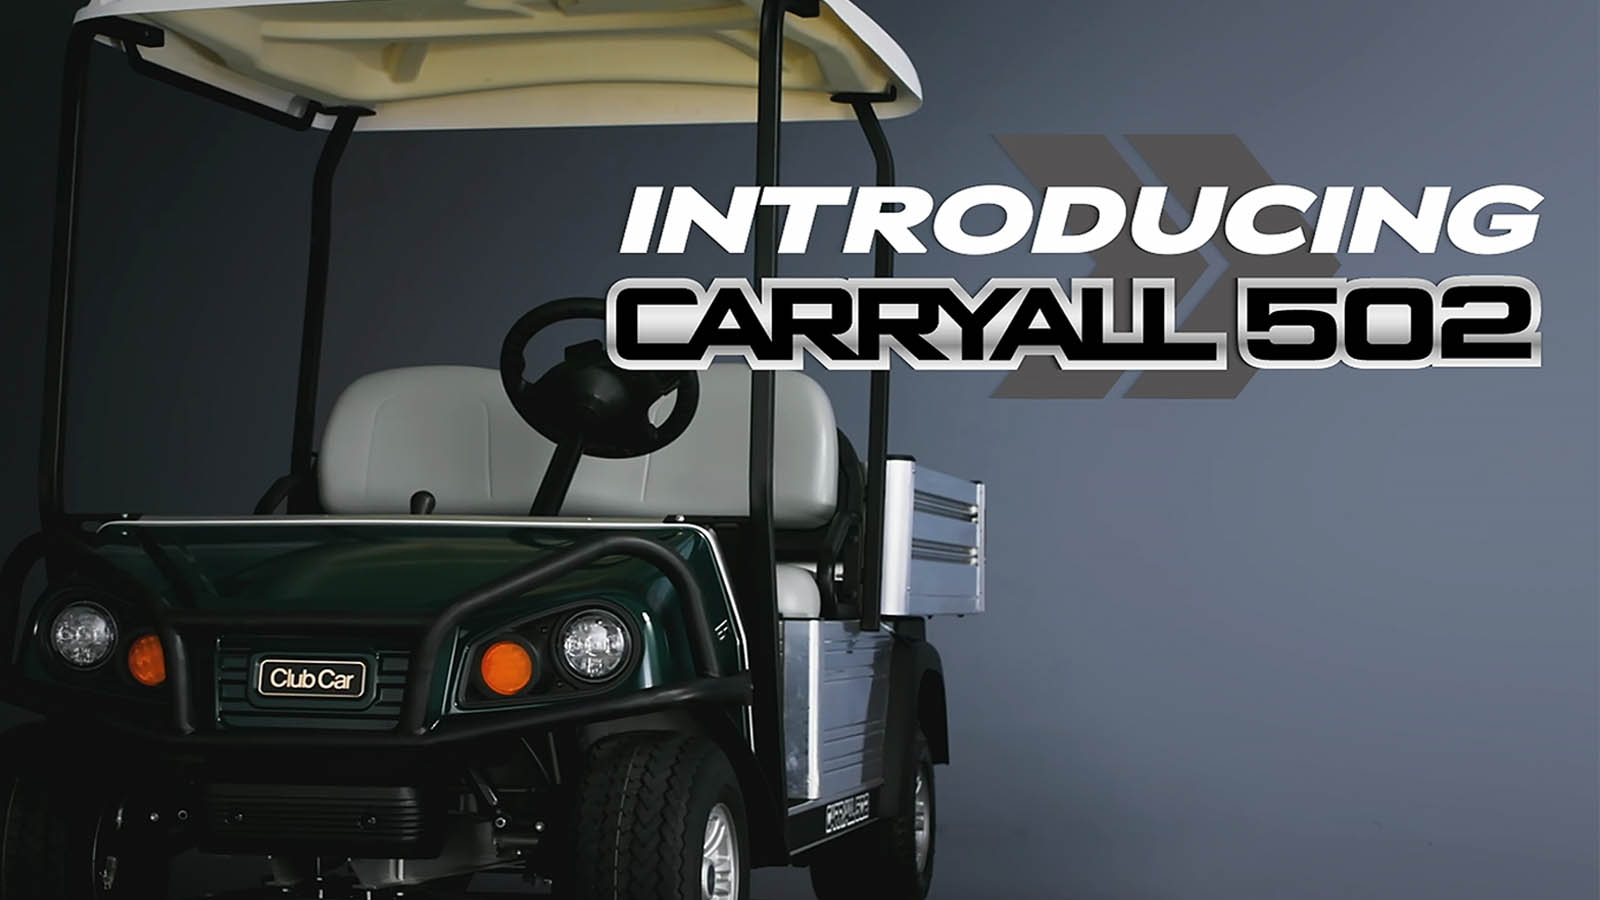 All New Carryall 502 Utility Vehicle